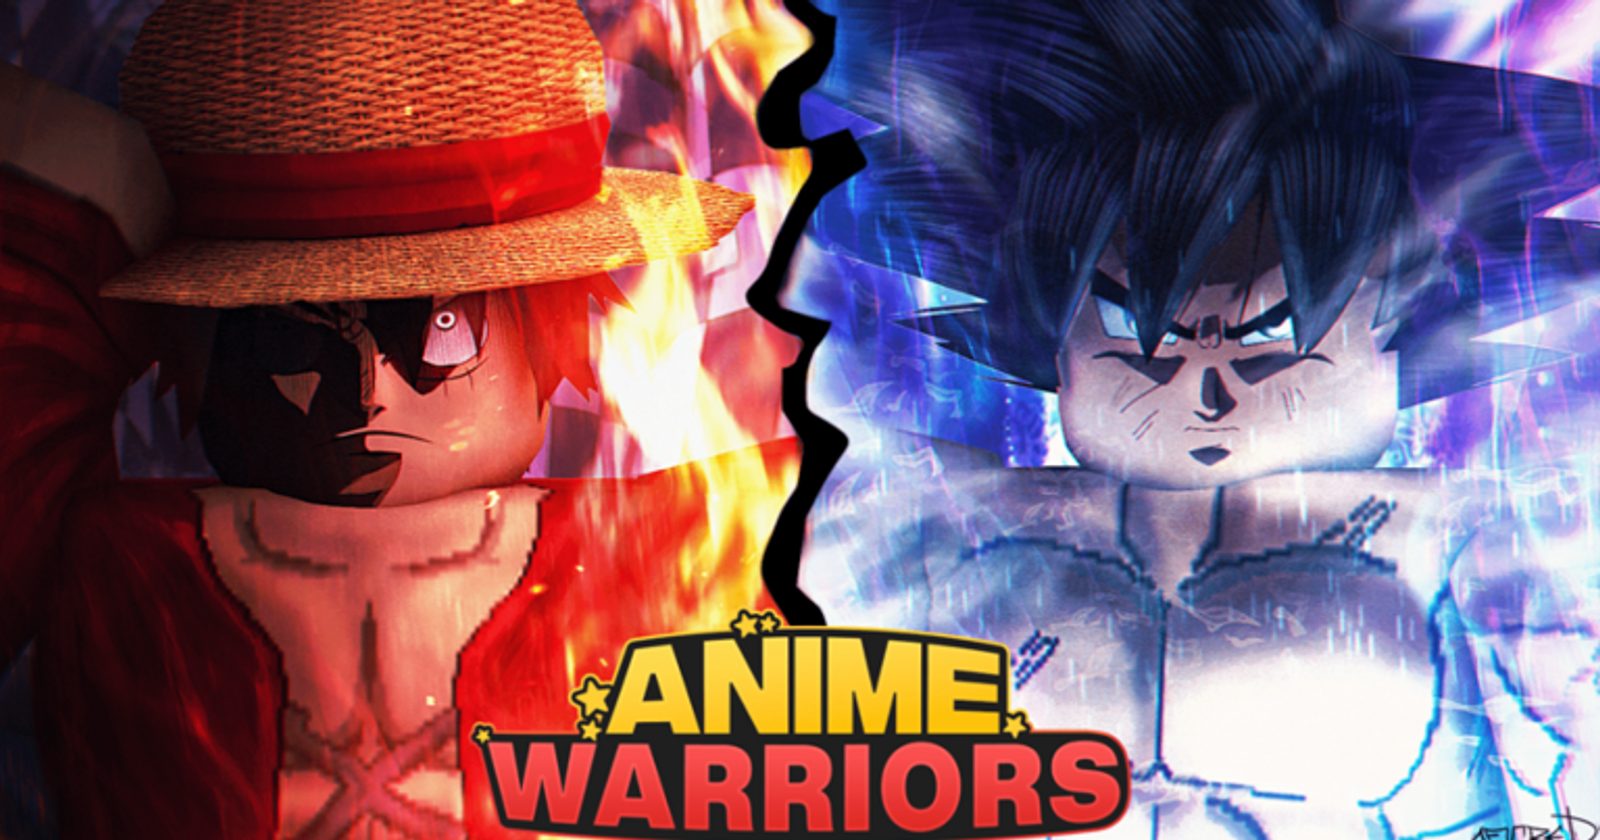 Roblox Anime Adventures tier list – All units, ranked